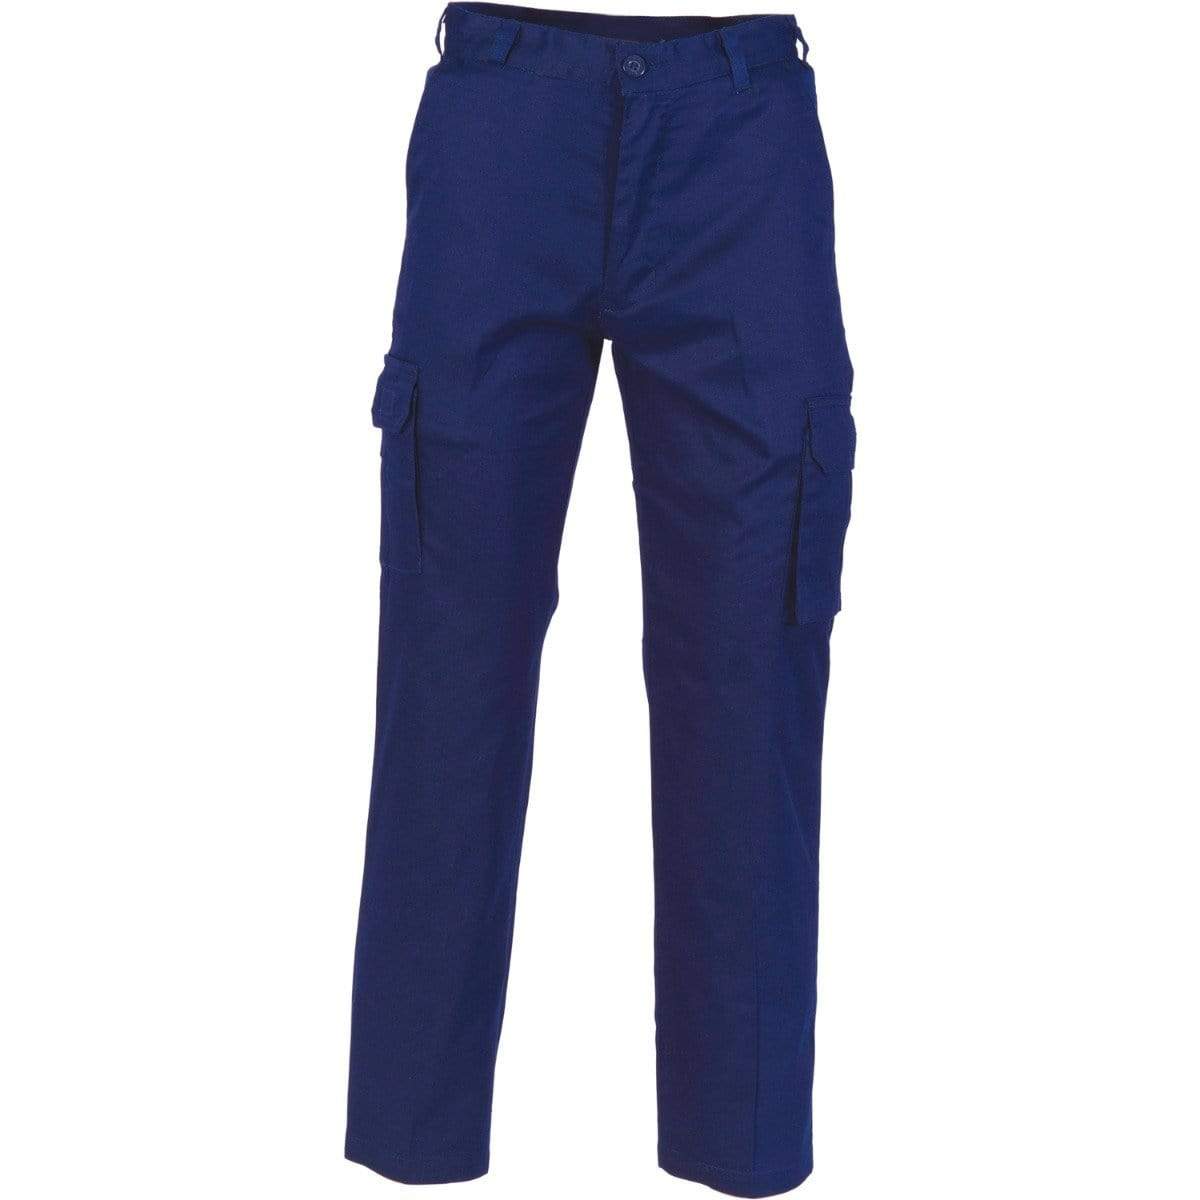 DNC Workwear Work Wear Navy / 72R DNC WORKWEAR Middle Weight Cool - Breeze Cotton Cargo Pants 3320